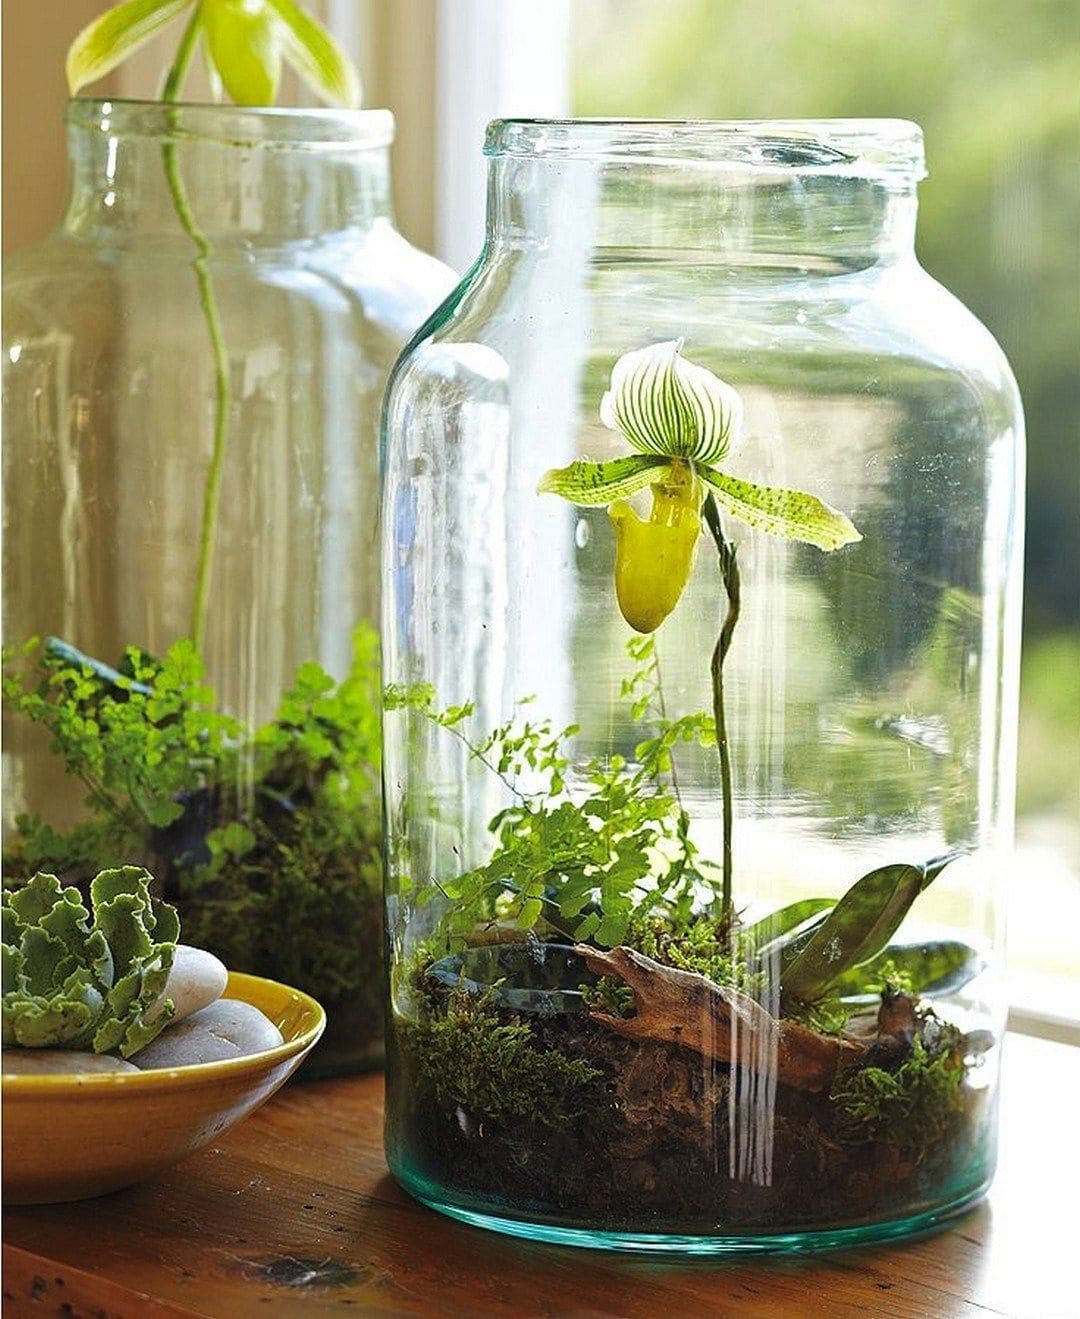 16 DIY bottle ideas to decorate your home - 85